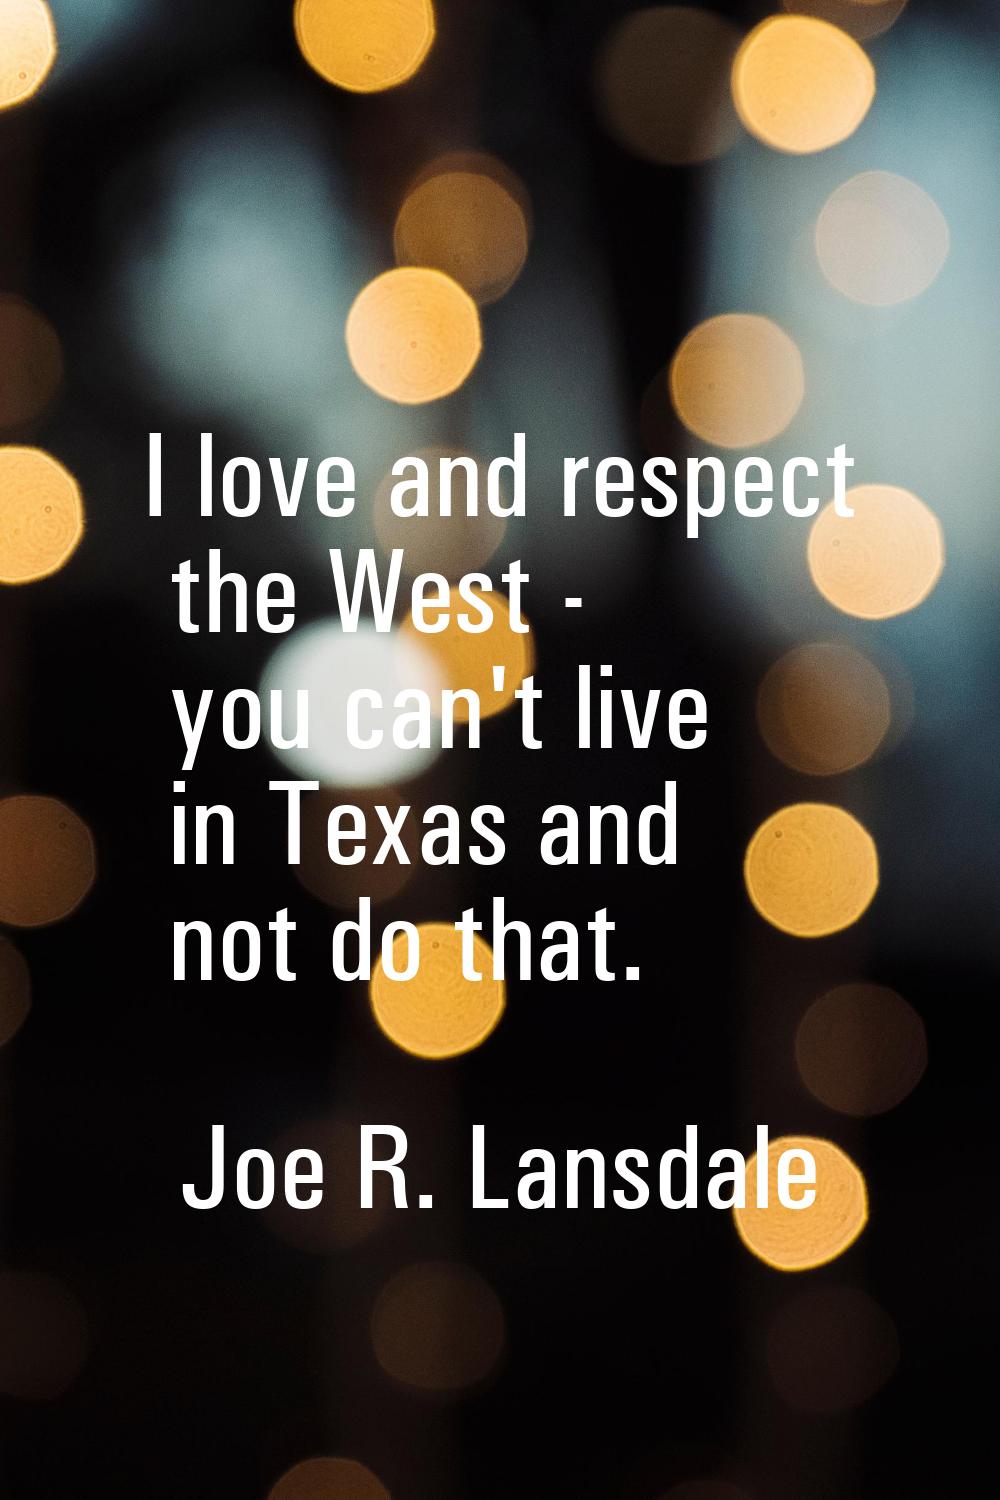 I love and respect the West - you can't live in Texas and not do that.